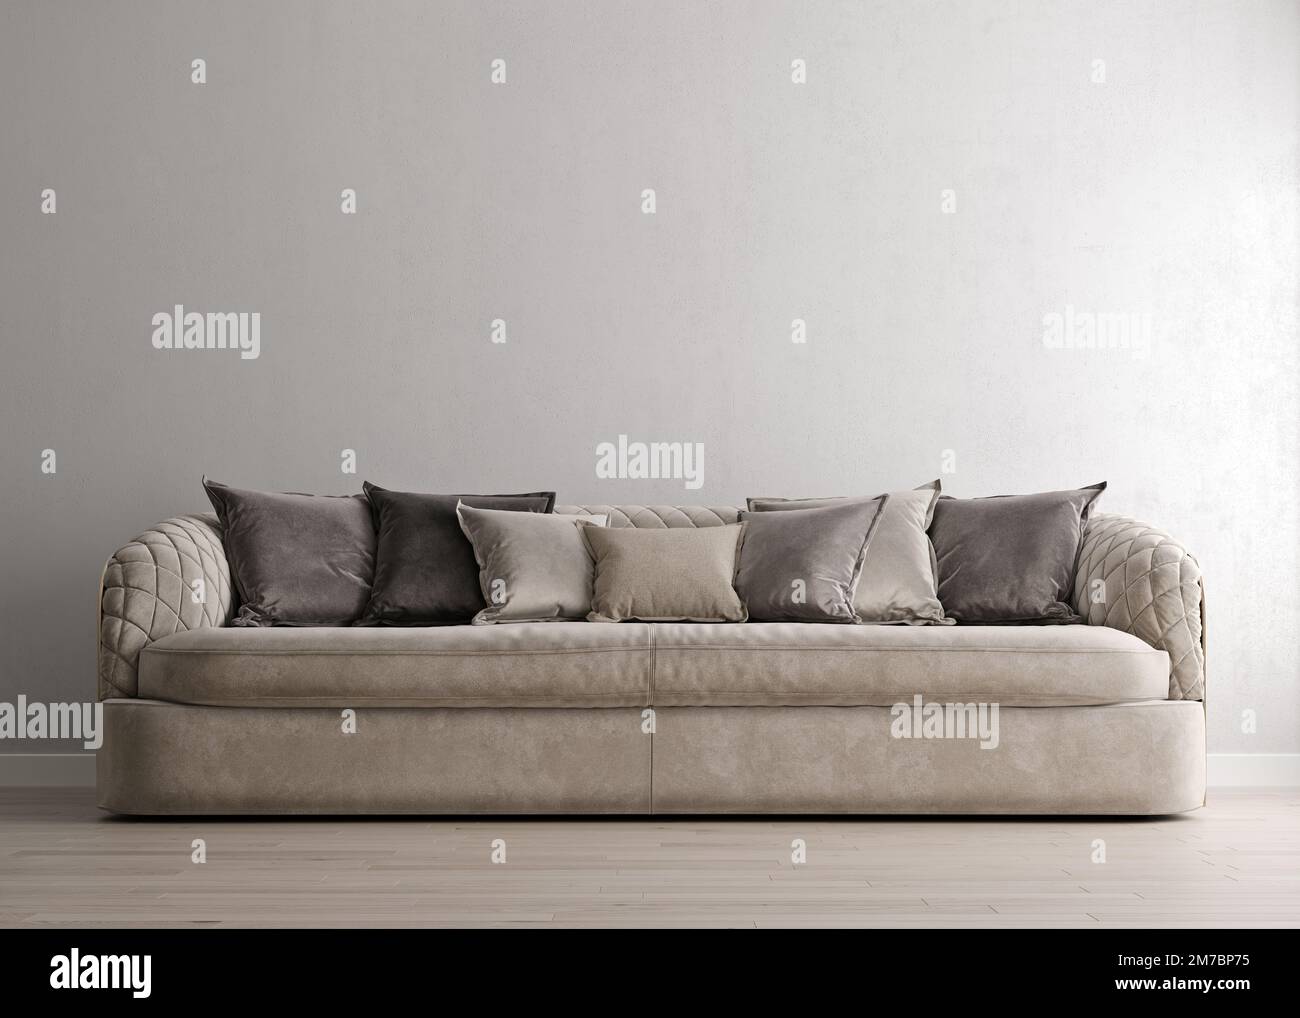 white concrete mock-up wall with white velvet sofa and pillows, modern interior, negative copy space above, 3d rendering, 3d illustration Stock Photo